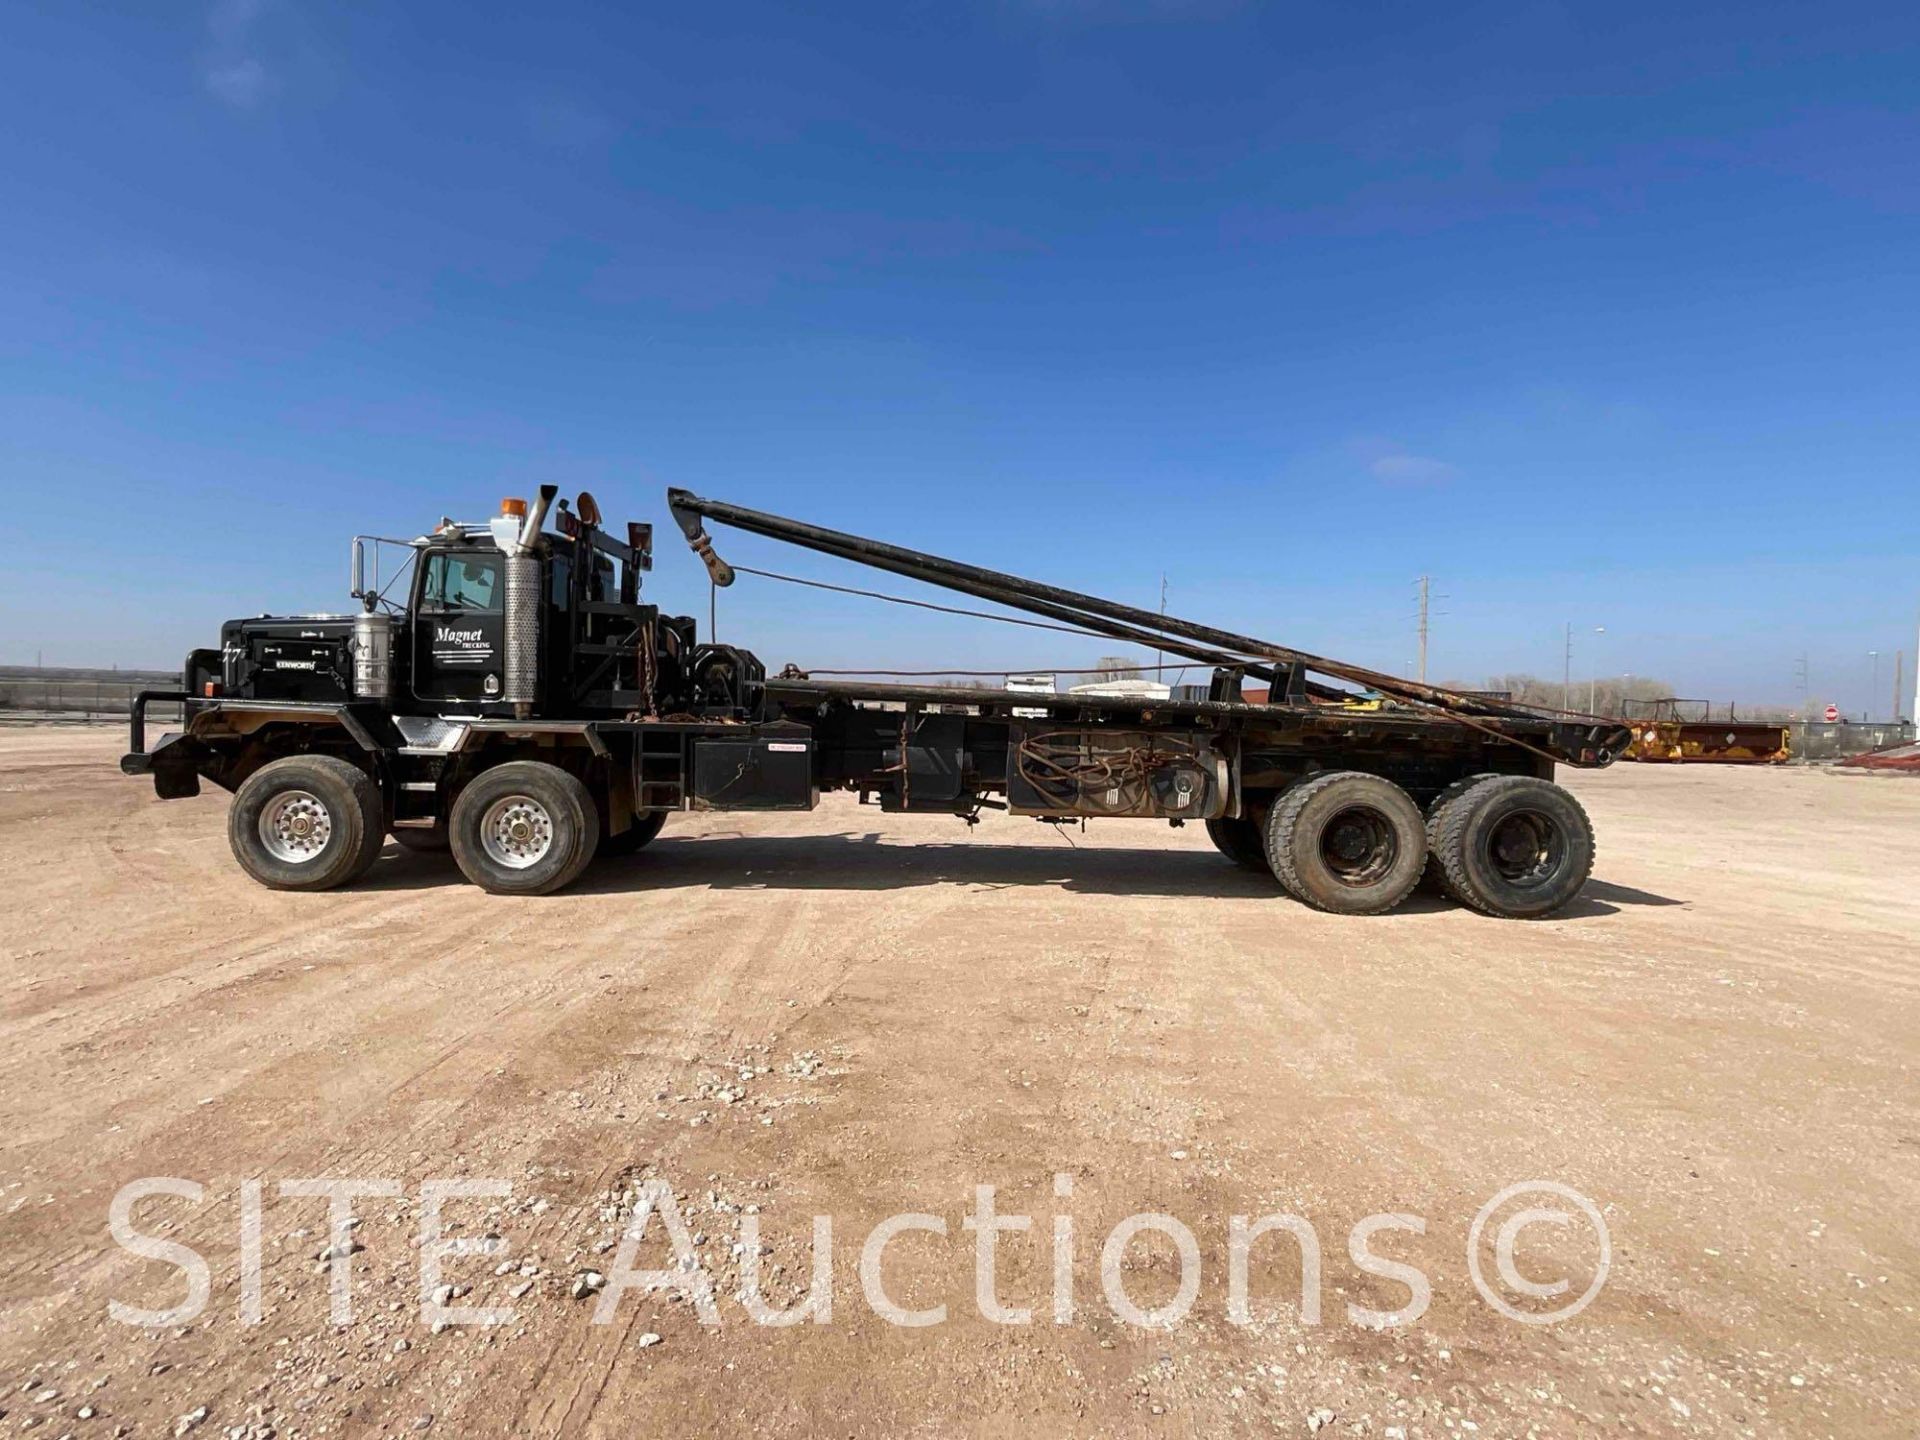 2000 Kenworth C500 T/A T/A Gin Pole Truck - Image 8 of 67